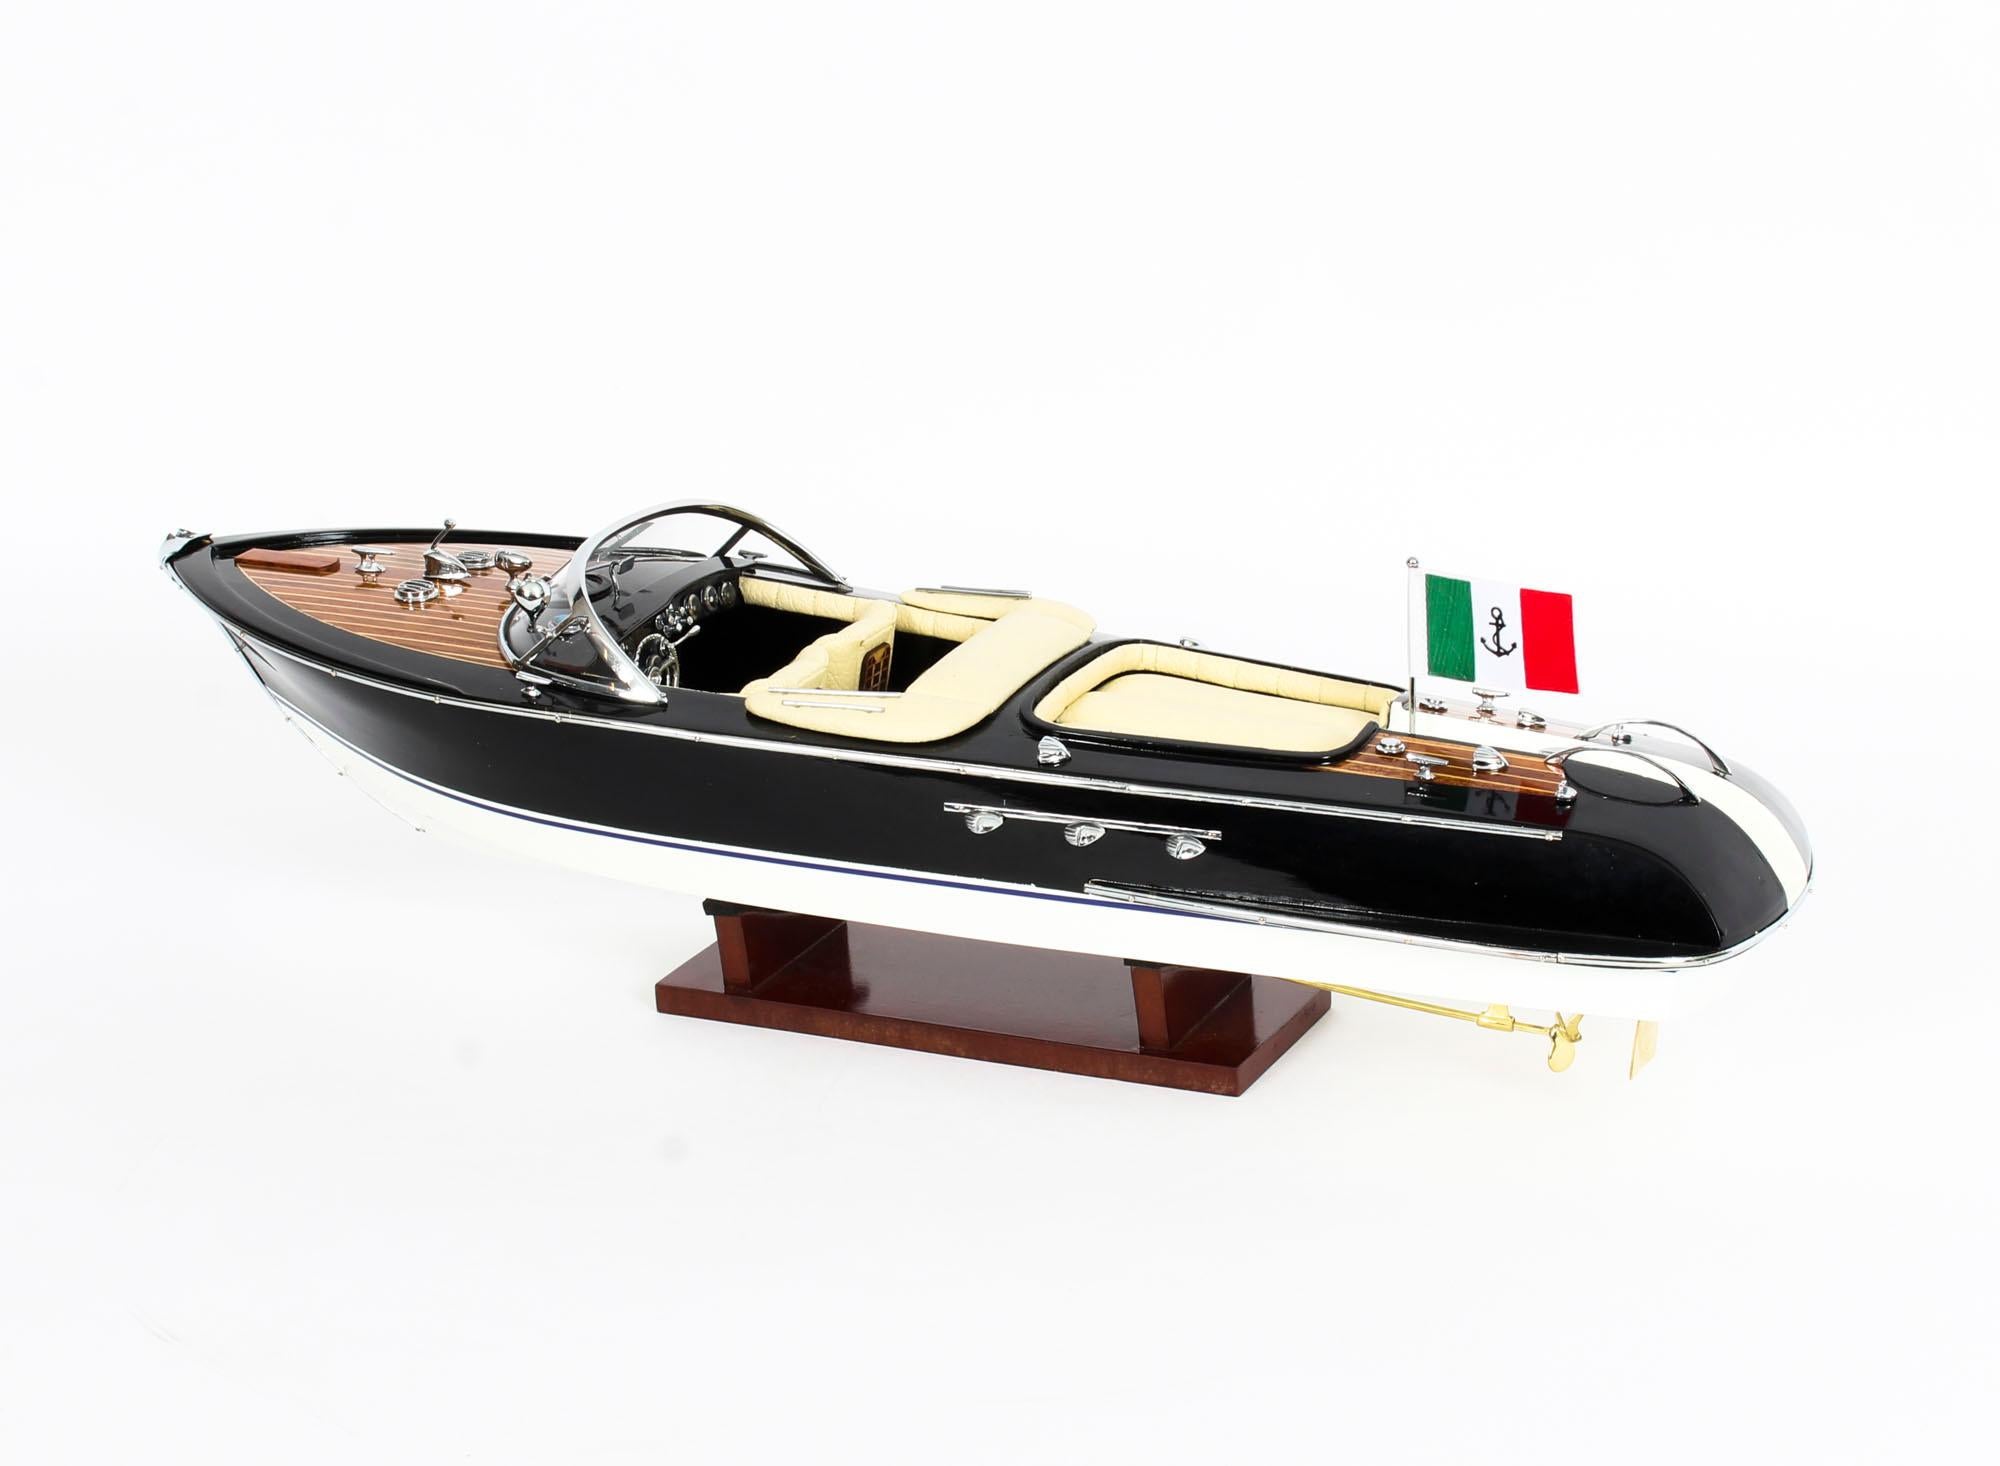 This is an exceptional handbuilt model of the “Riva Aquarama”, a luxury wooden launch built by the Italian yacht builder Riva, dating from the late 20th century.

In production from 1962-1996, the Aquarama was the most famous of Carlo Riva’s